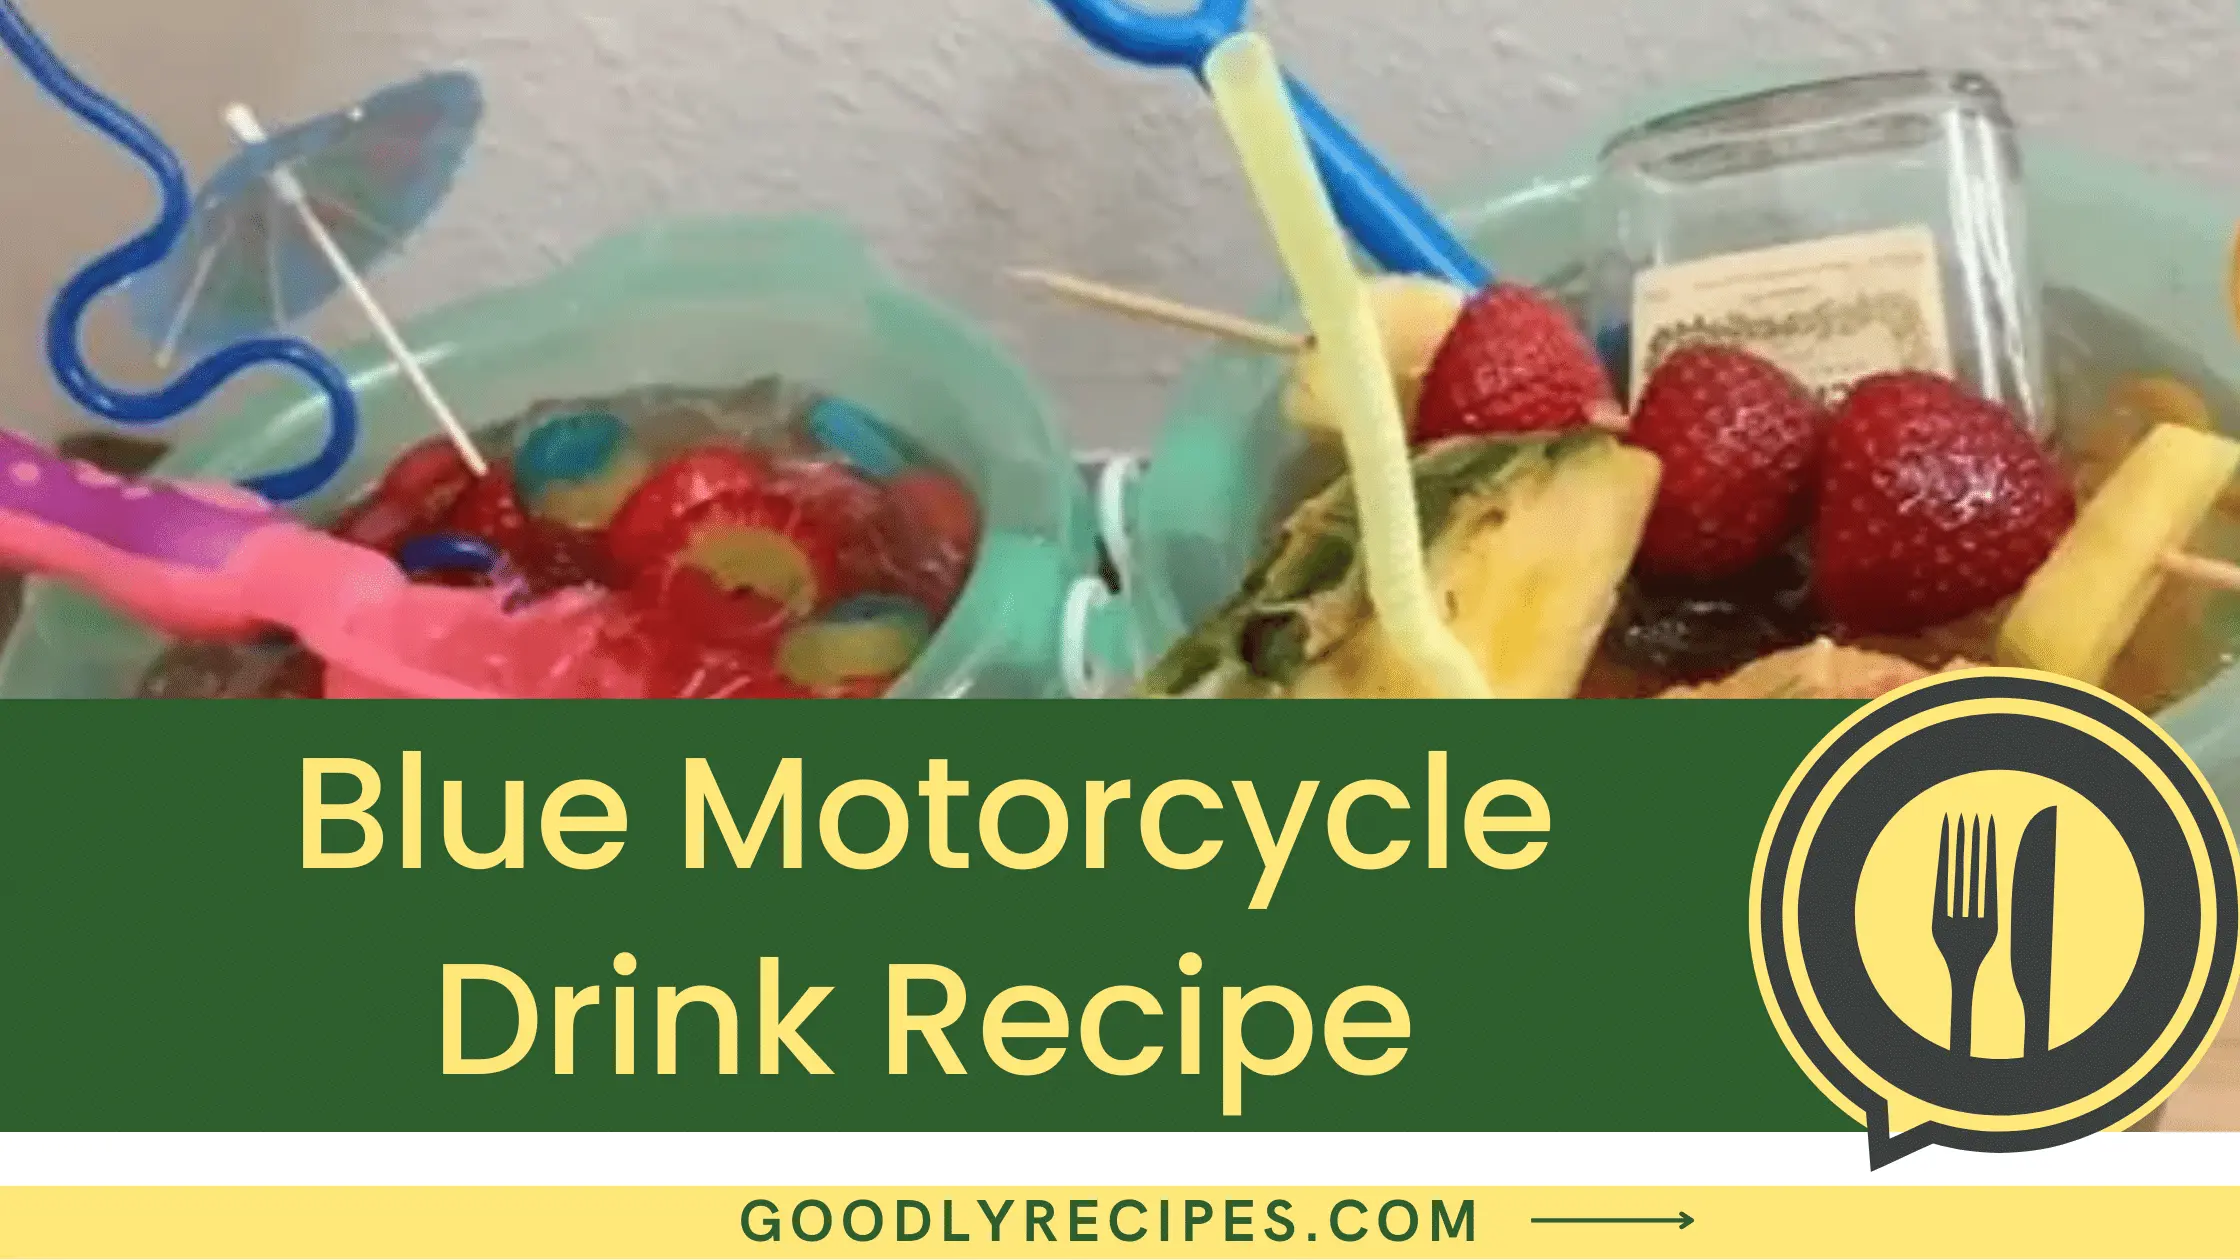 What Is A Blue Motorcycle Drink?